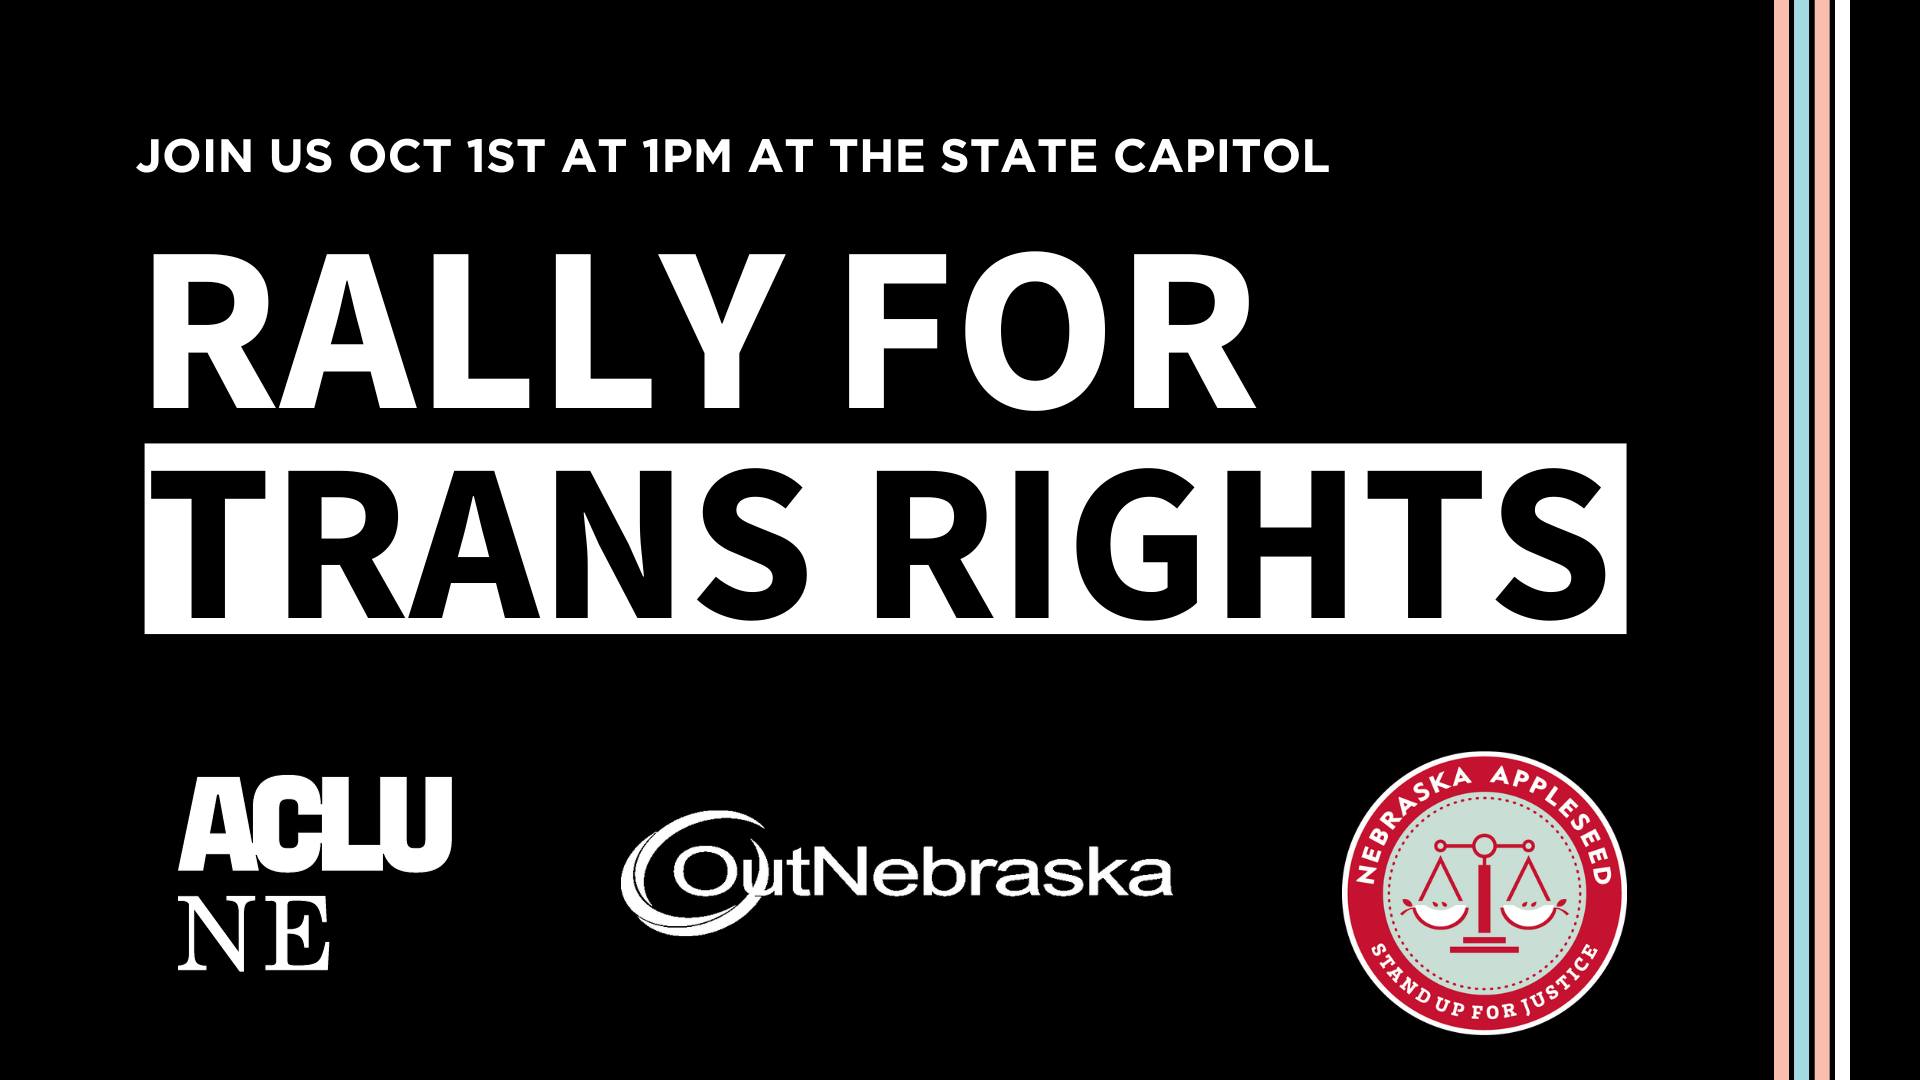 Join us Oct 1st at 1pm at the state capitol Rally for Trans Rights ACLU NE, OutNebraska, Nebraska Appleseed